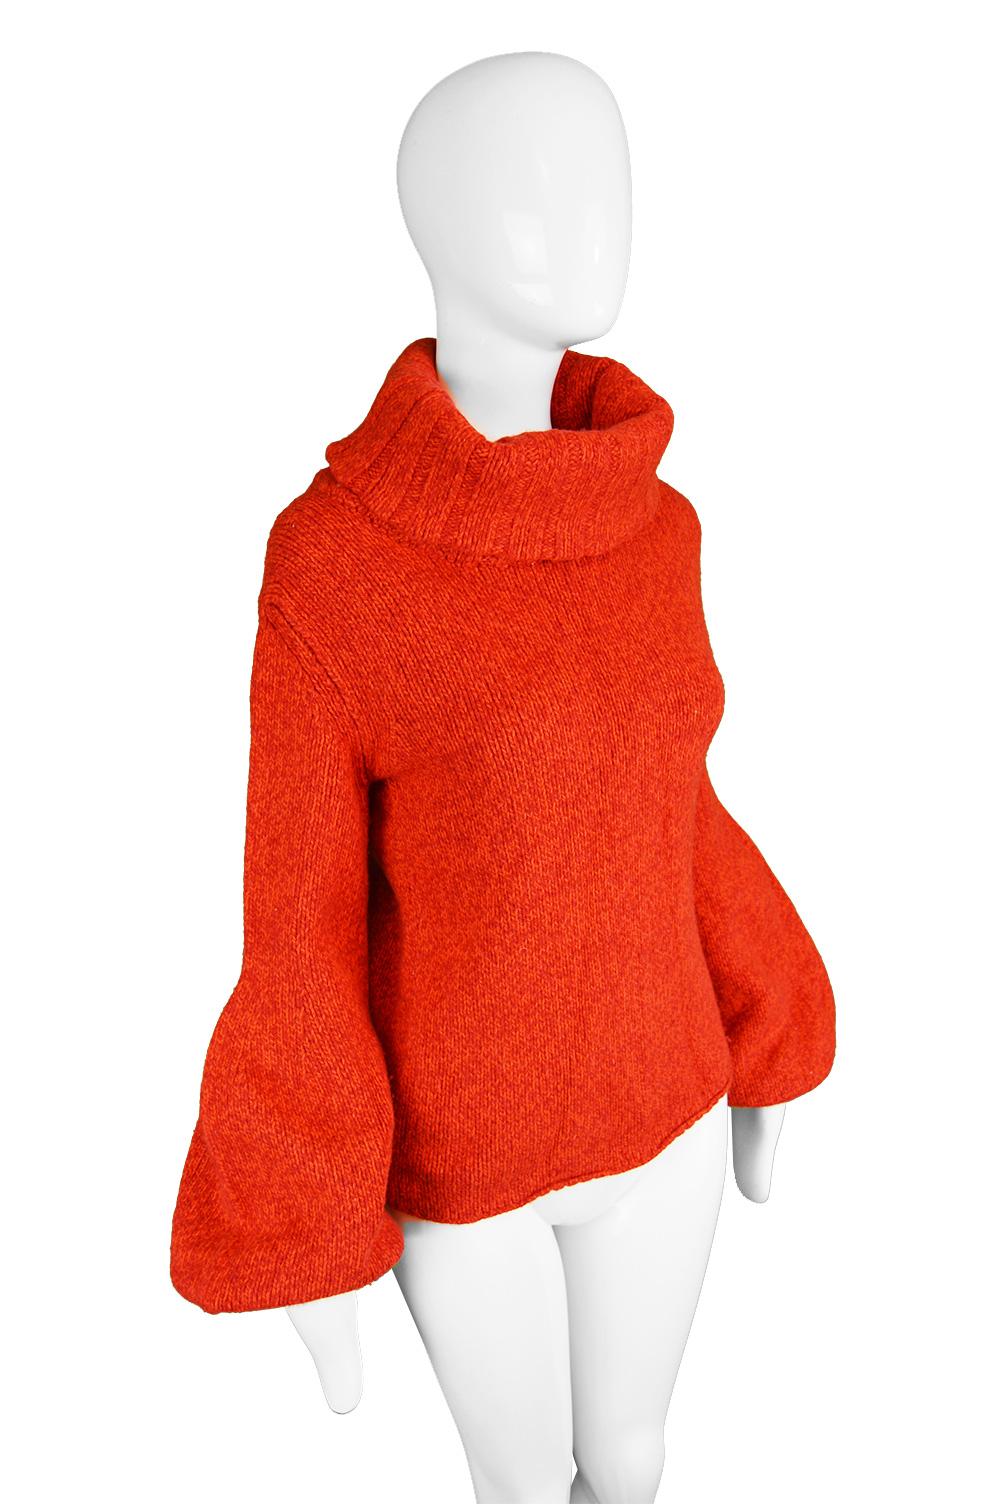 Mila Schon Vintage Red Wool & Cashmere Balloon Sleeve Roll Neck Sweater, 1980s 2